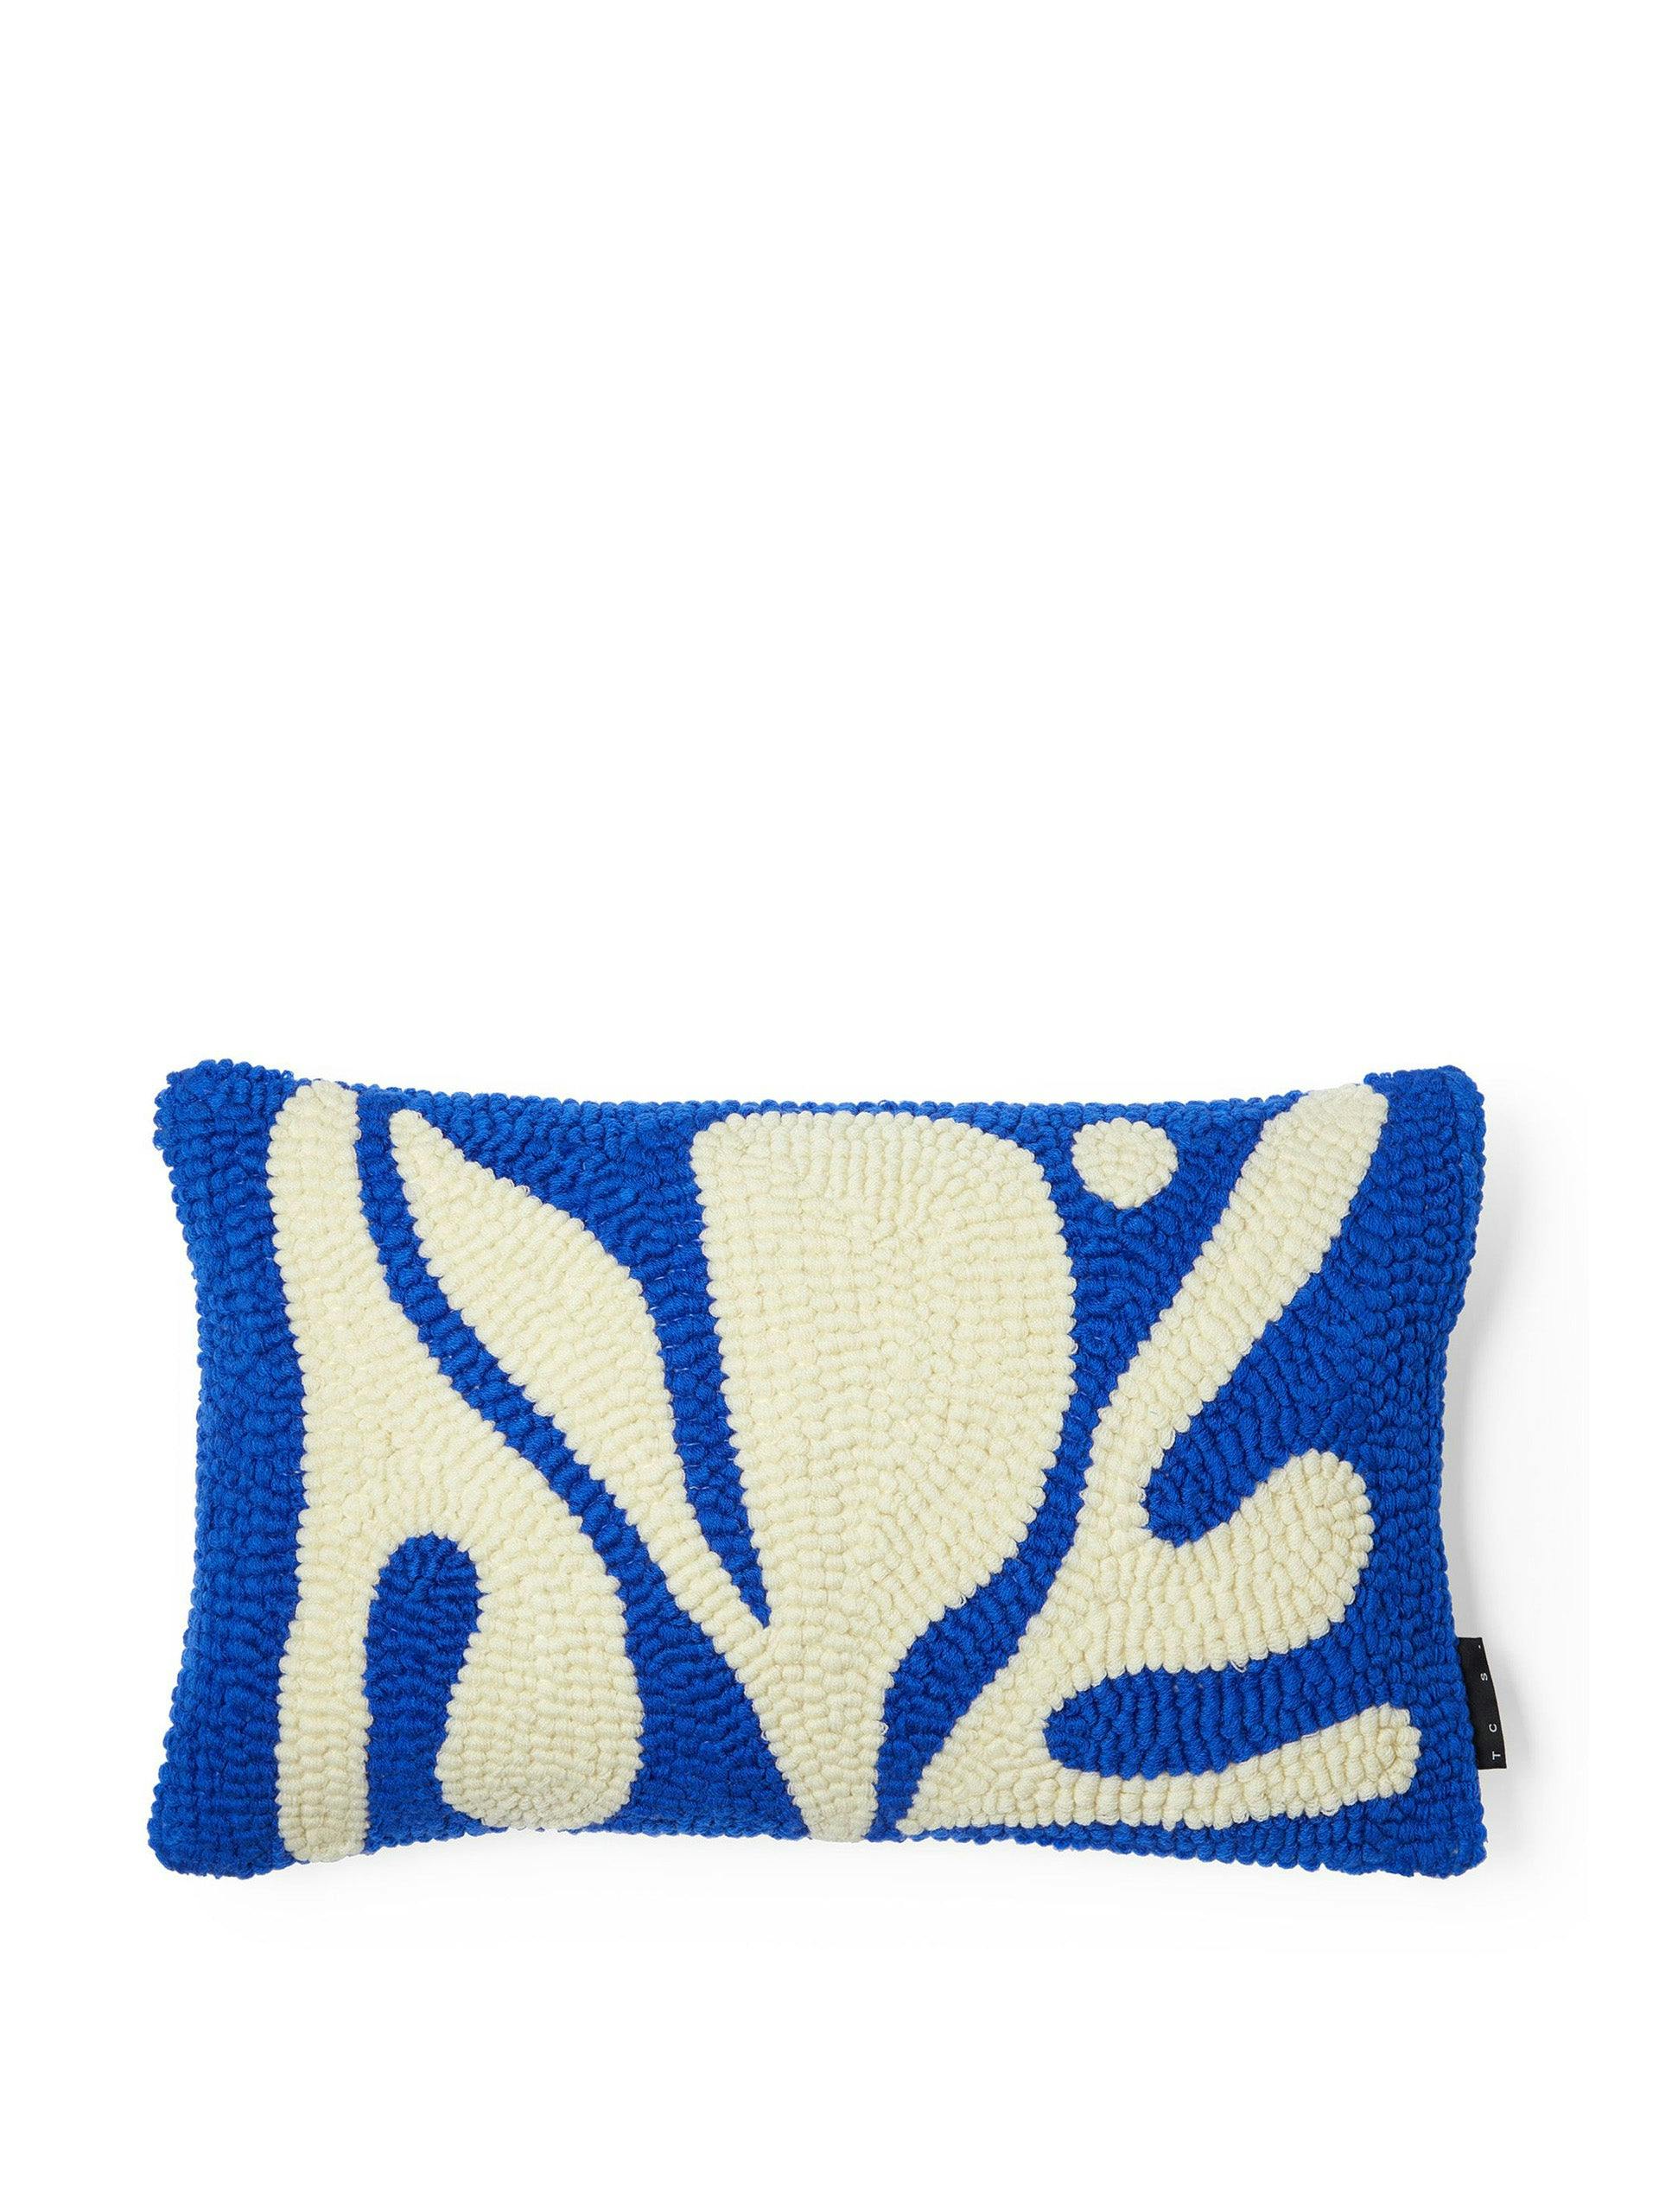 Mellis hand knotted cobalt blue cushion cover